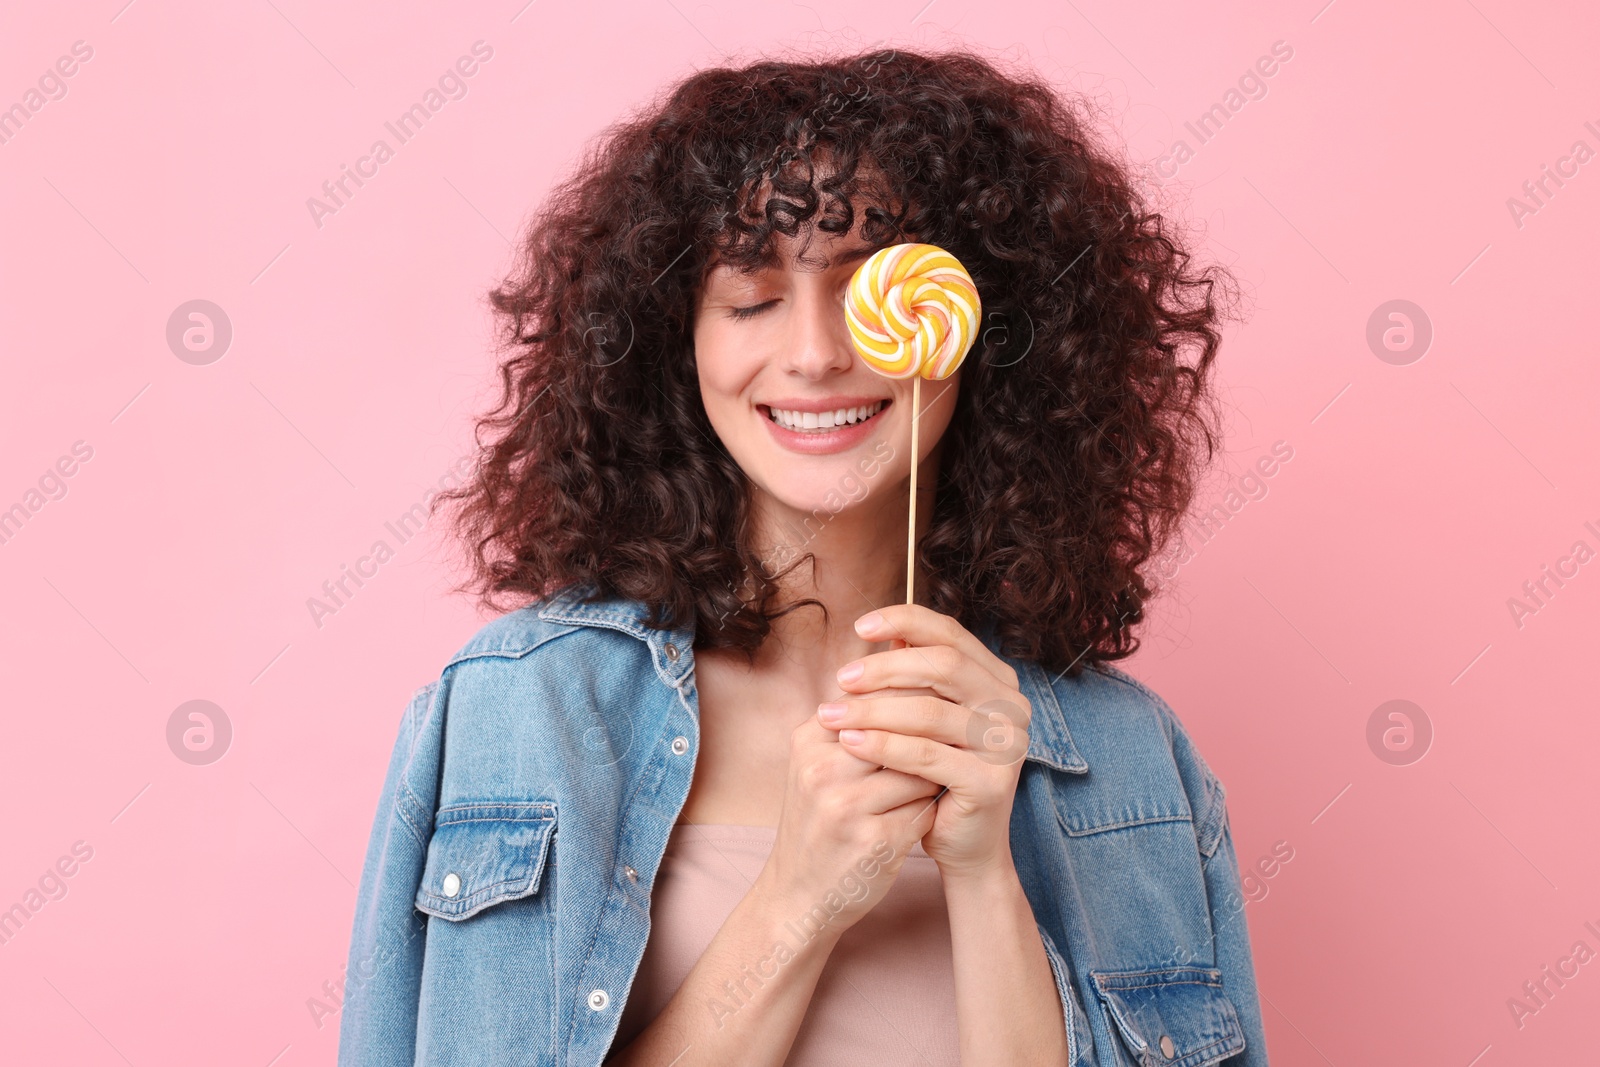 Photo of Beautiful woman covering eye with lollipop on pink background